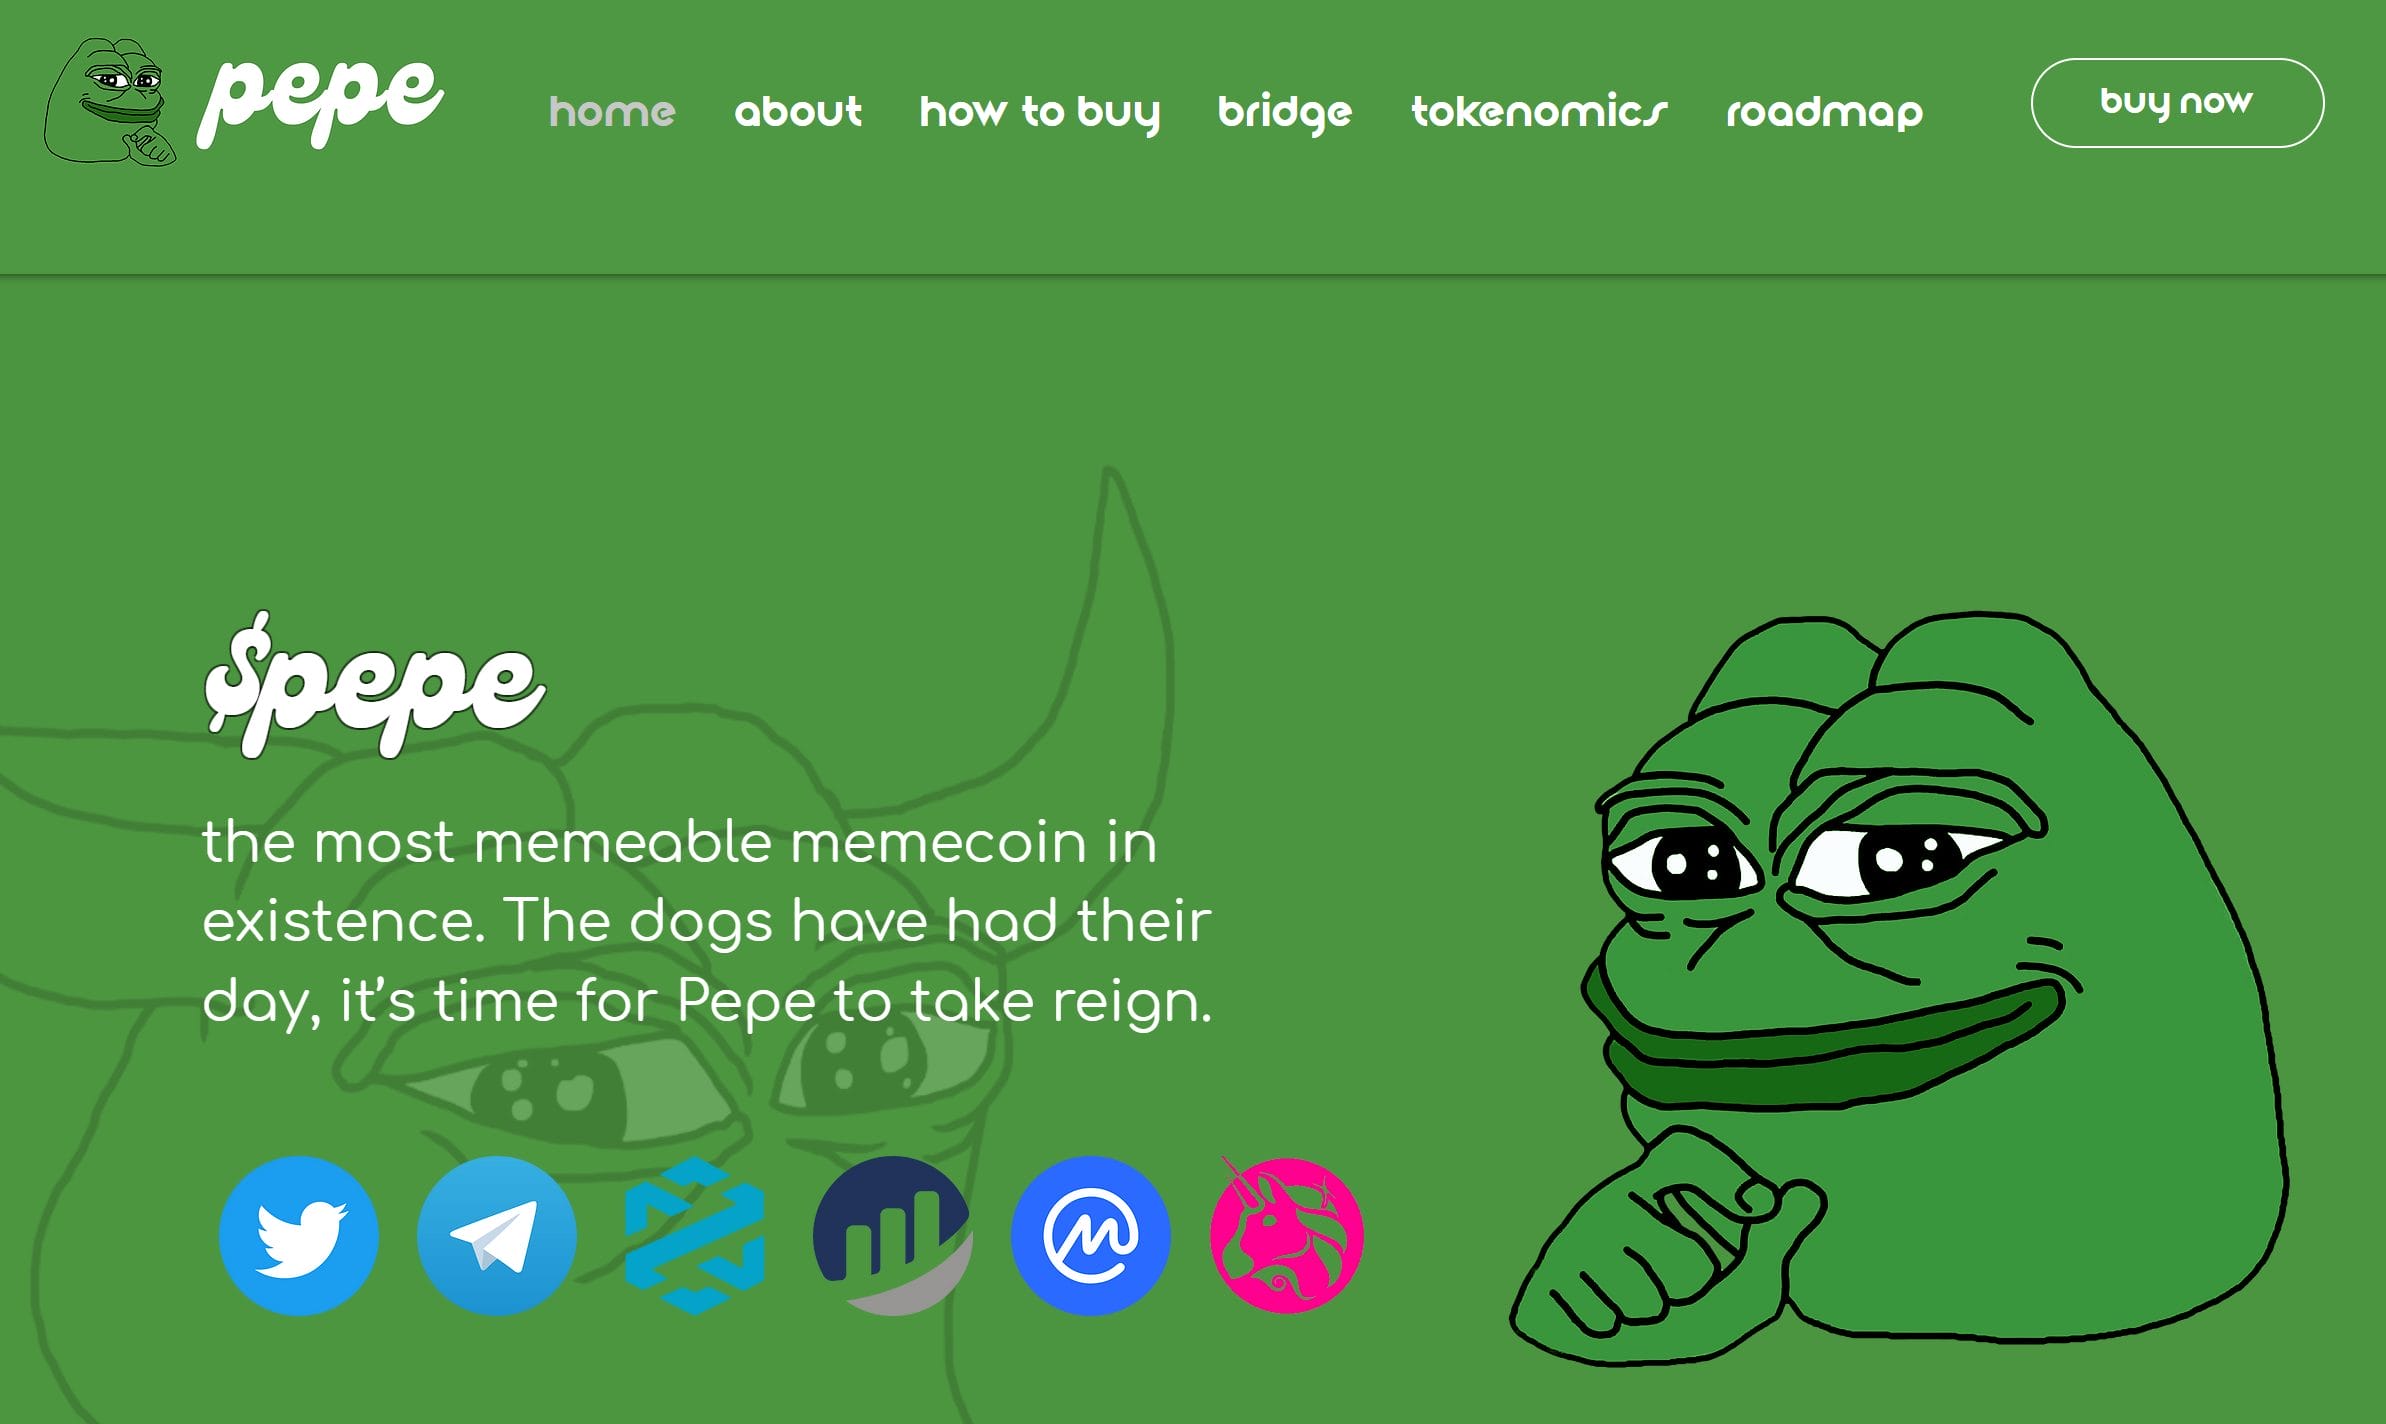 The website homepage of Pepe, a popular meme crypto